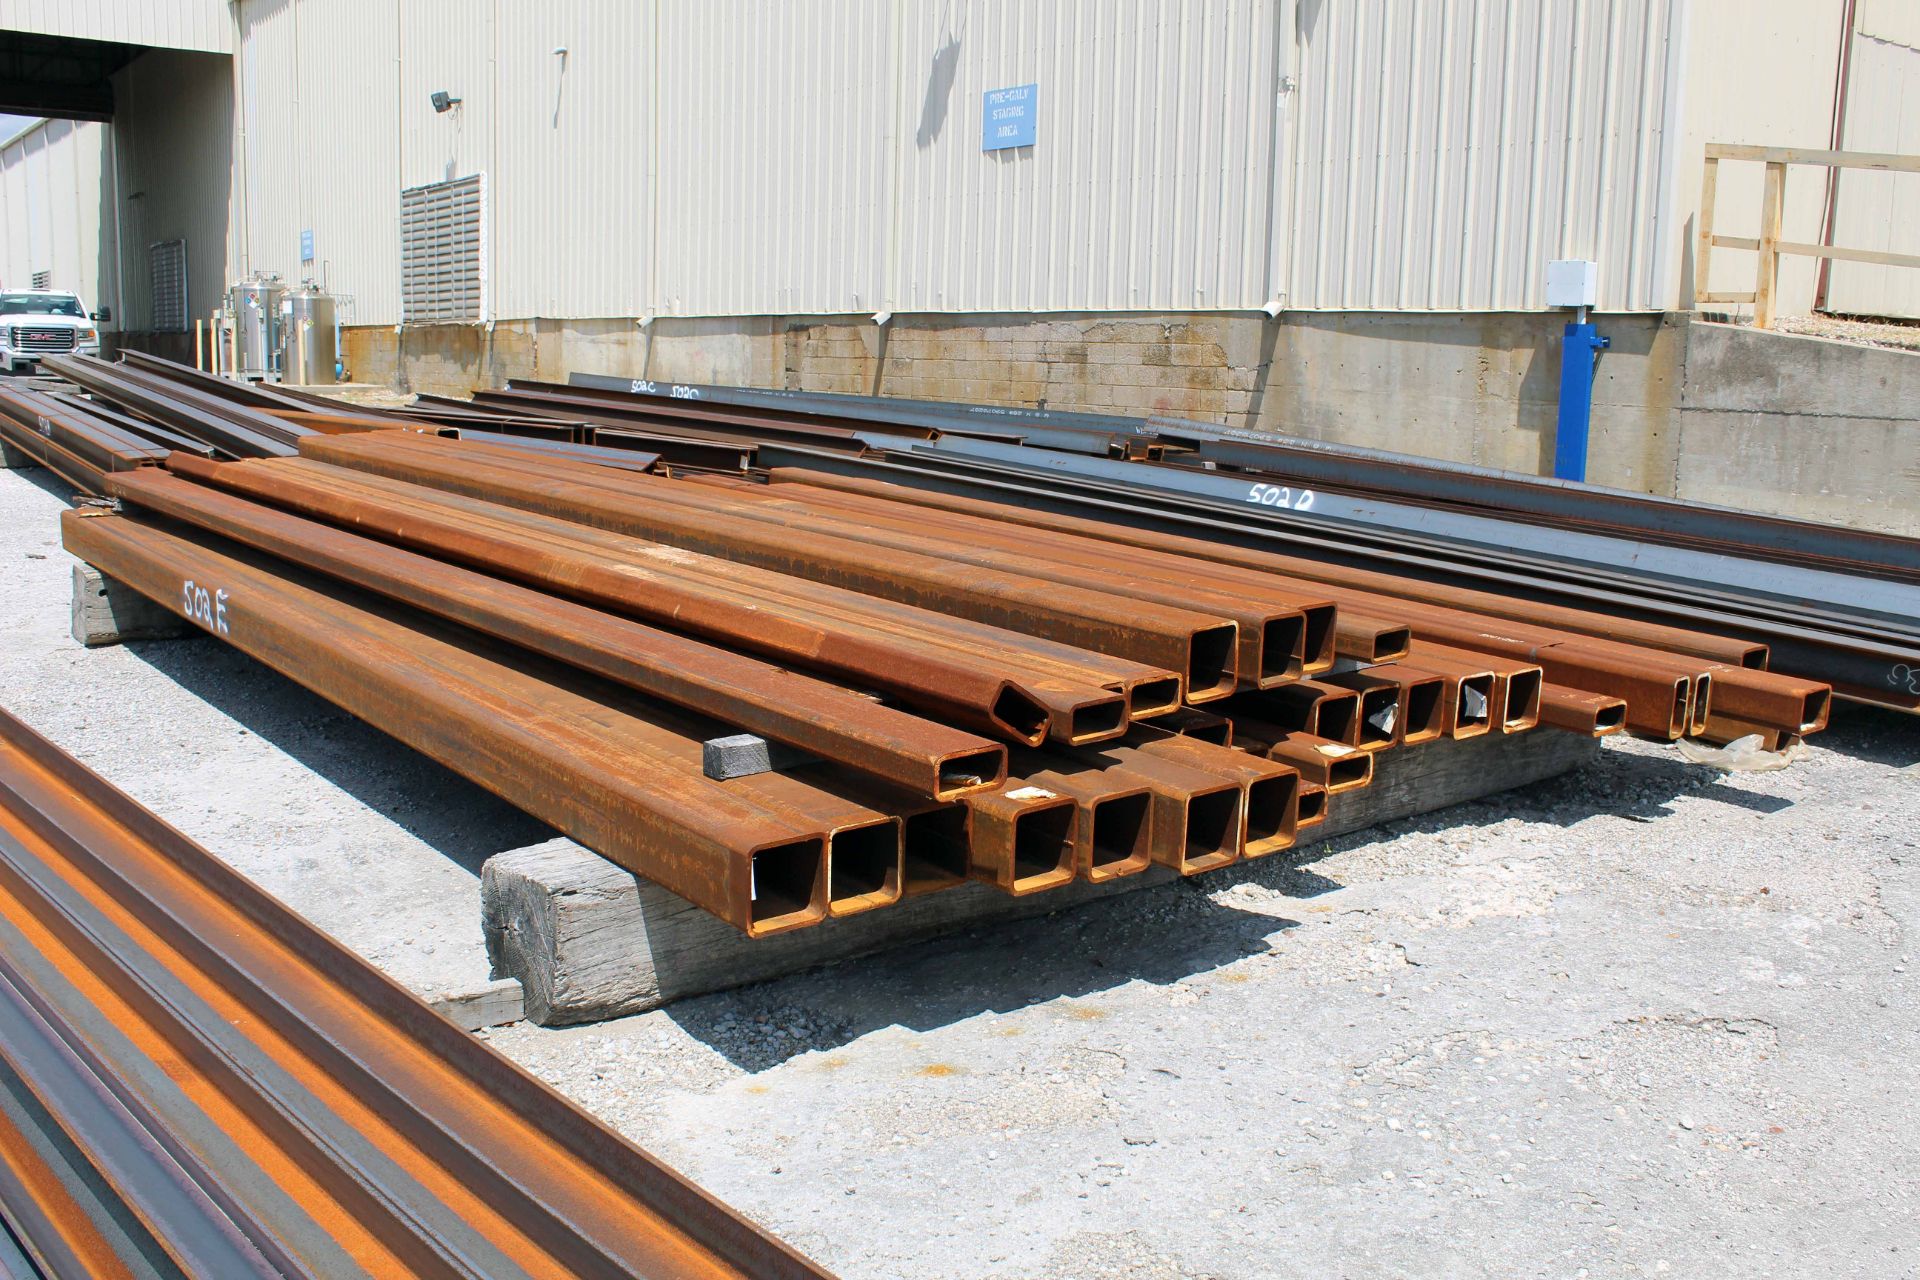 LOT OF RAW MATERIAL CONSISTING OF: square & rect. tubing, 8" x 4" x 20' & 8" x 8" x 20'